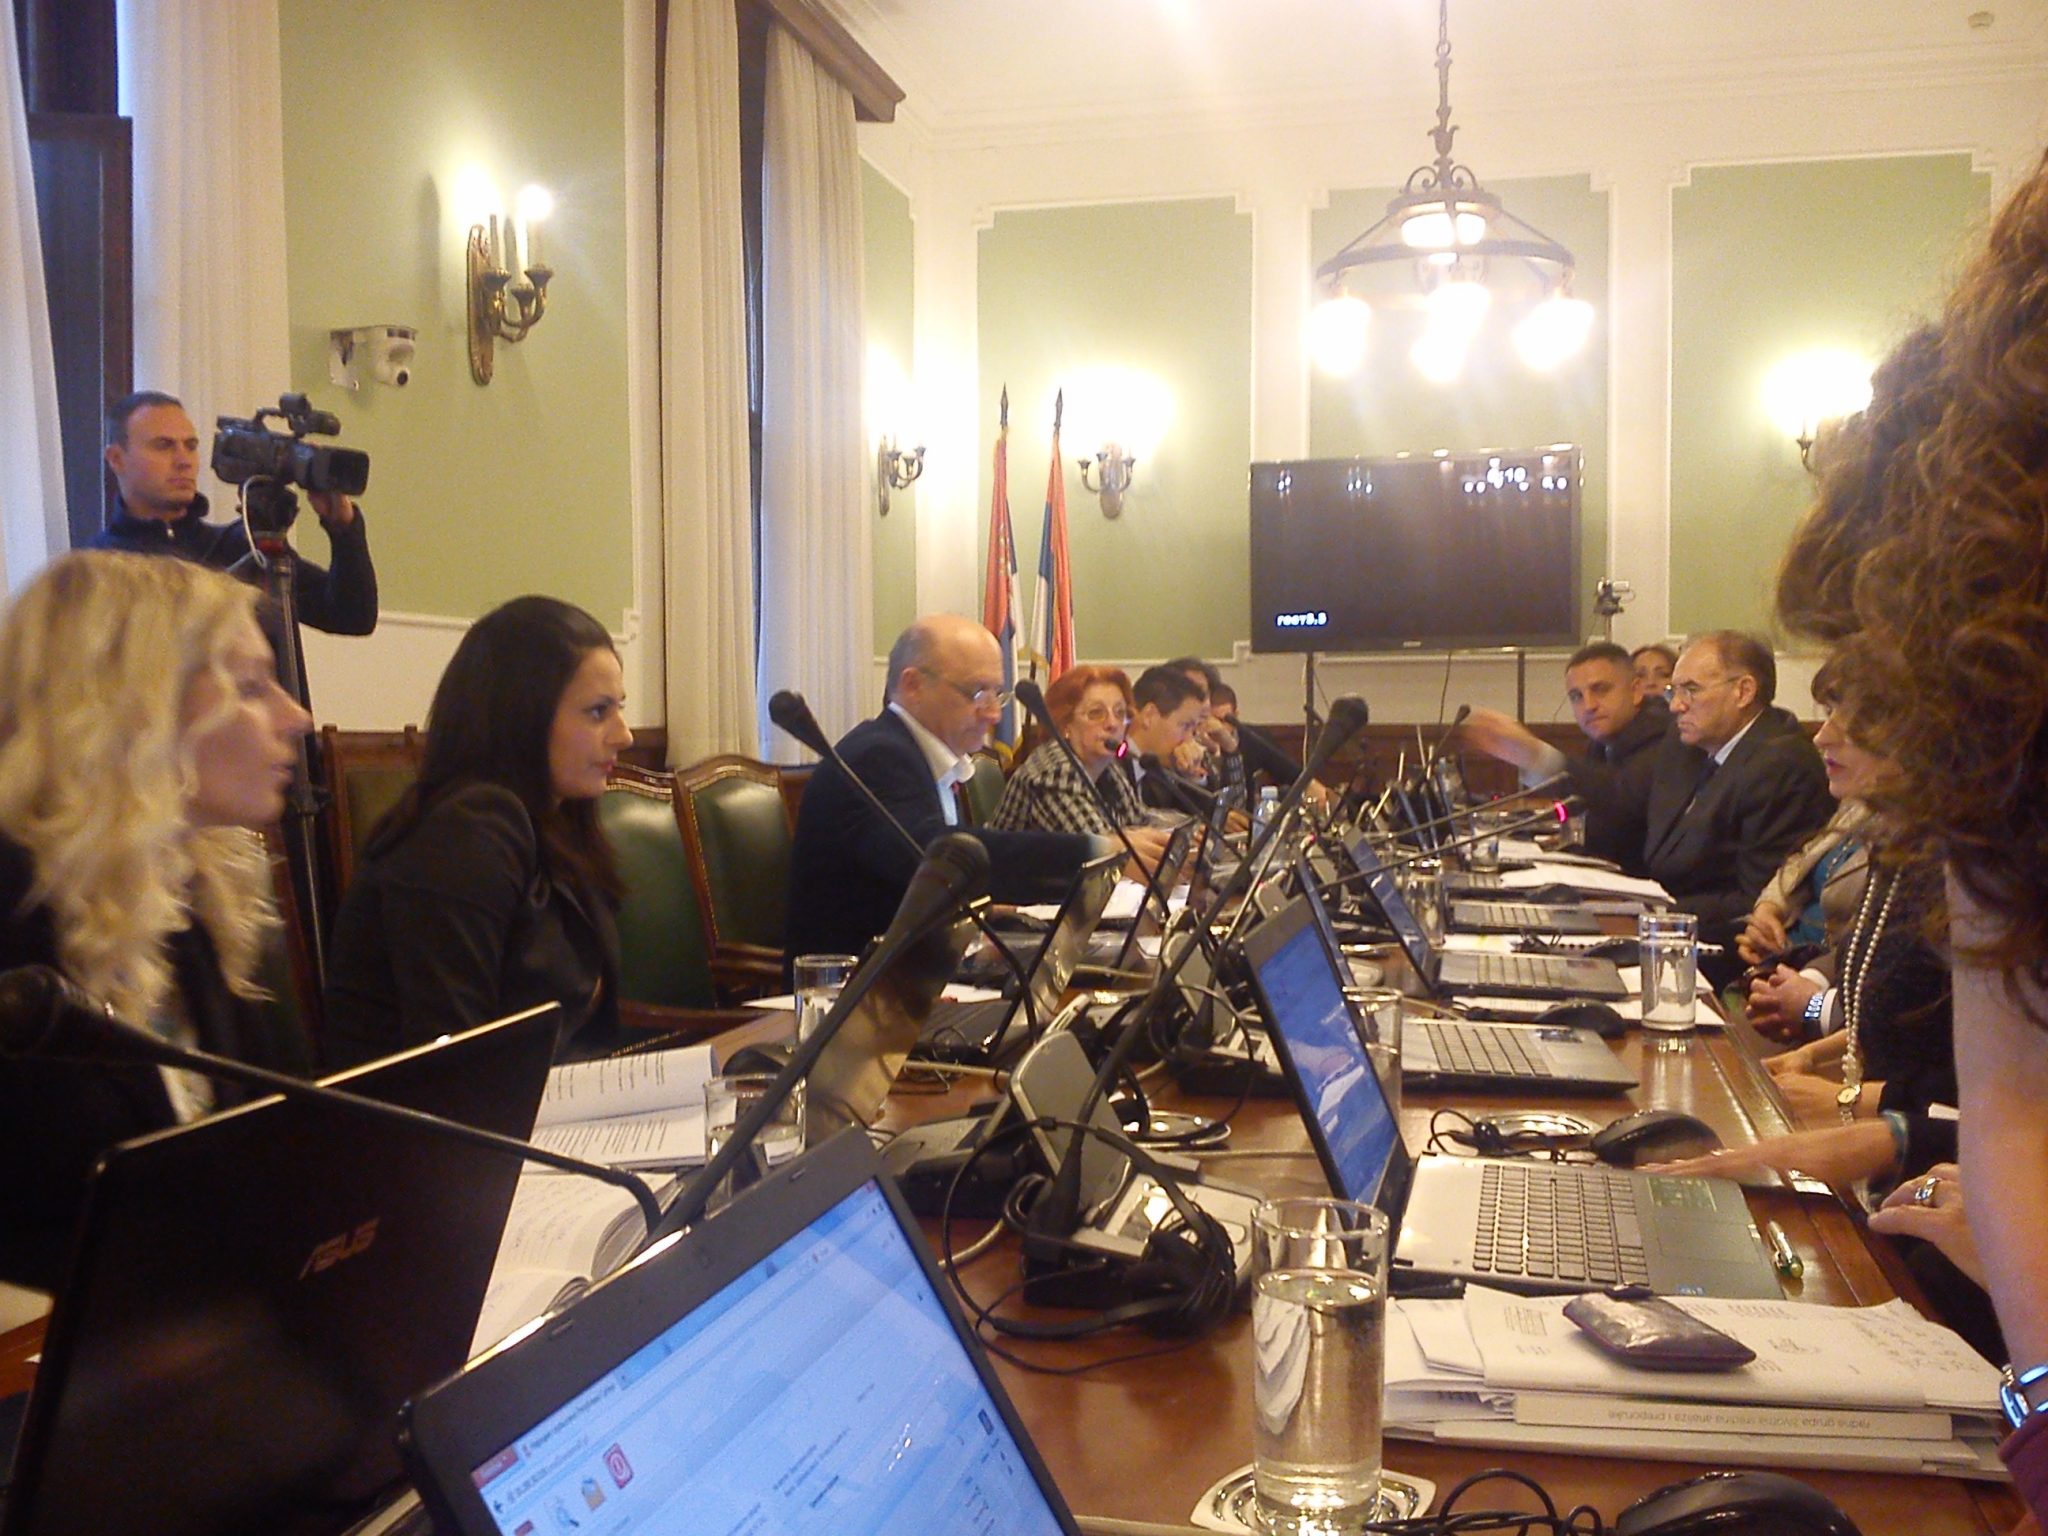 BFPE took part in the meeting of the Assembly’s Environmental Protection Committee